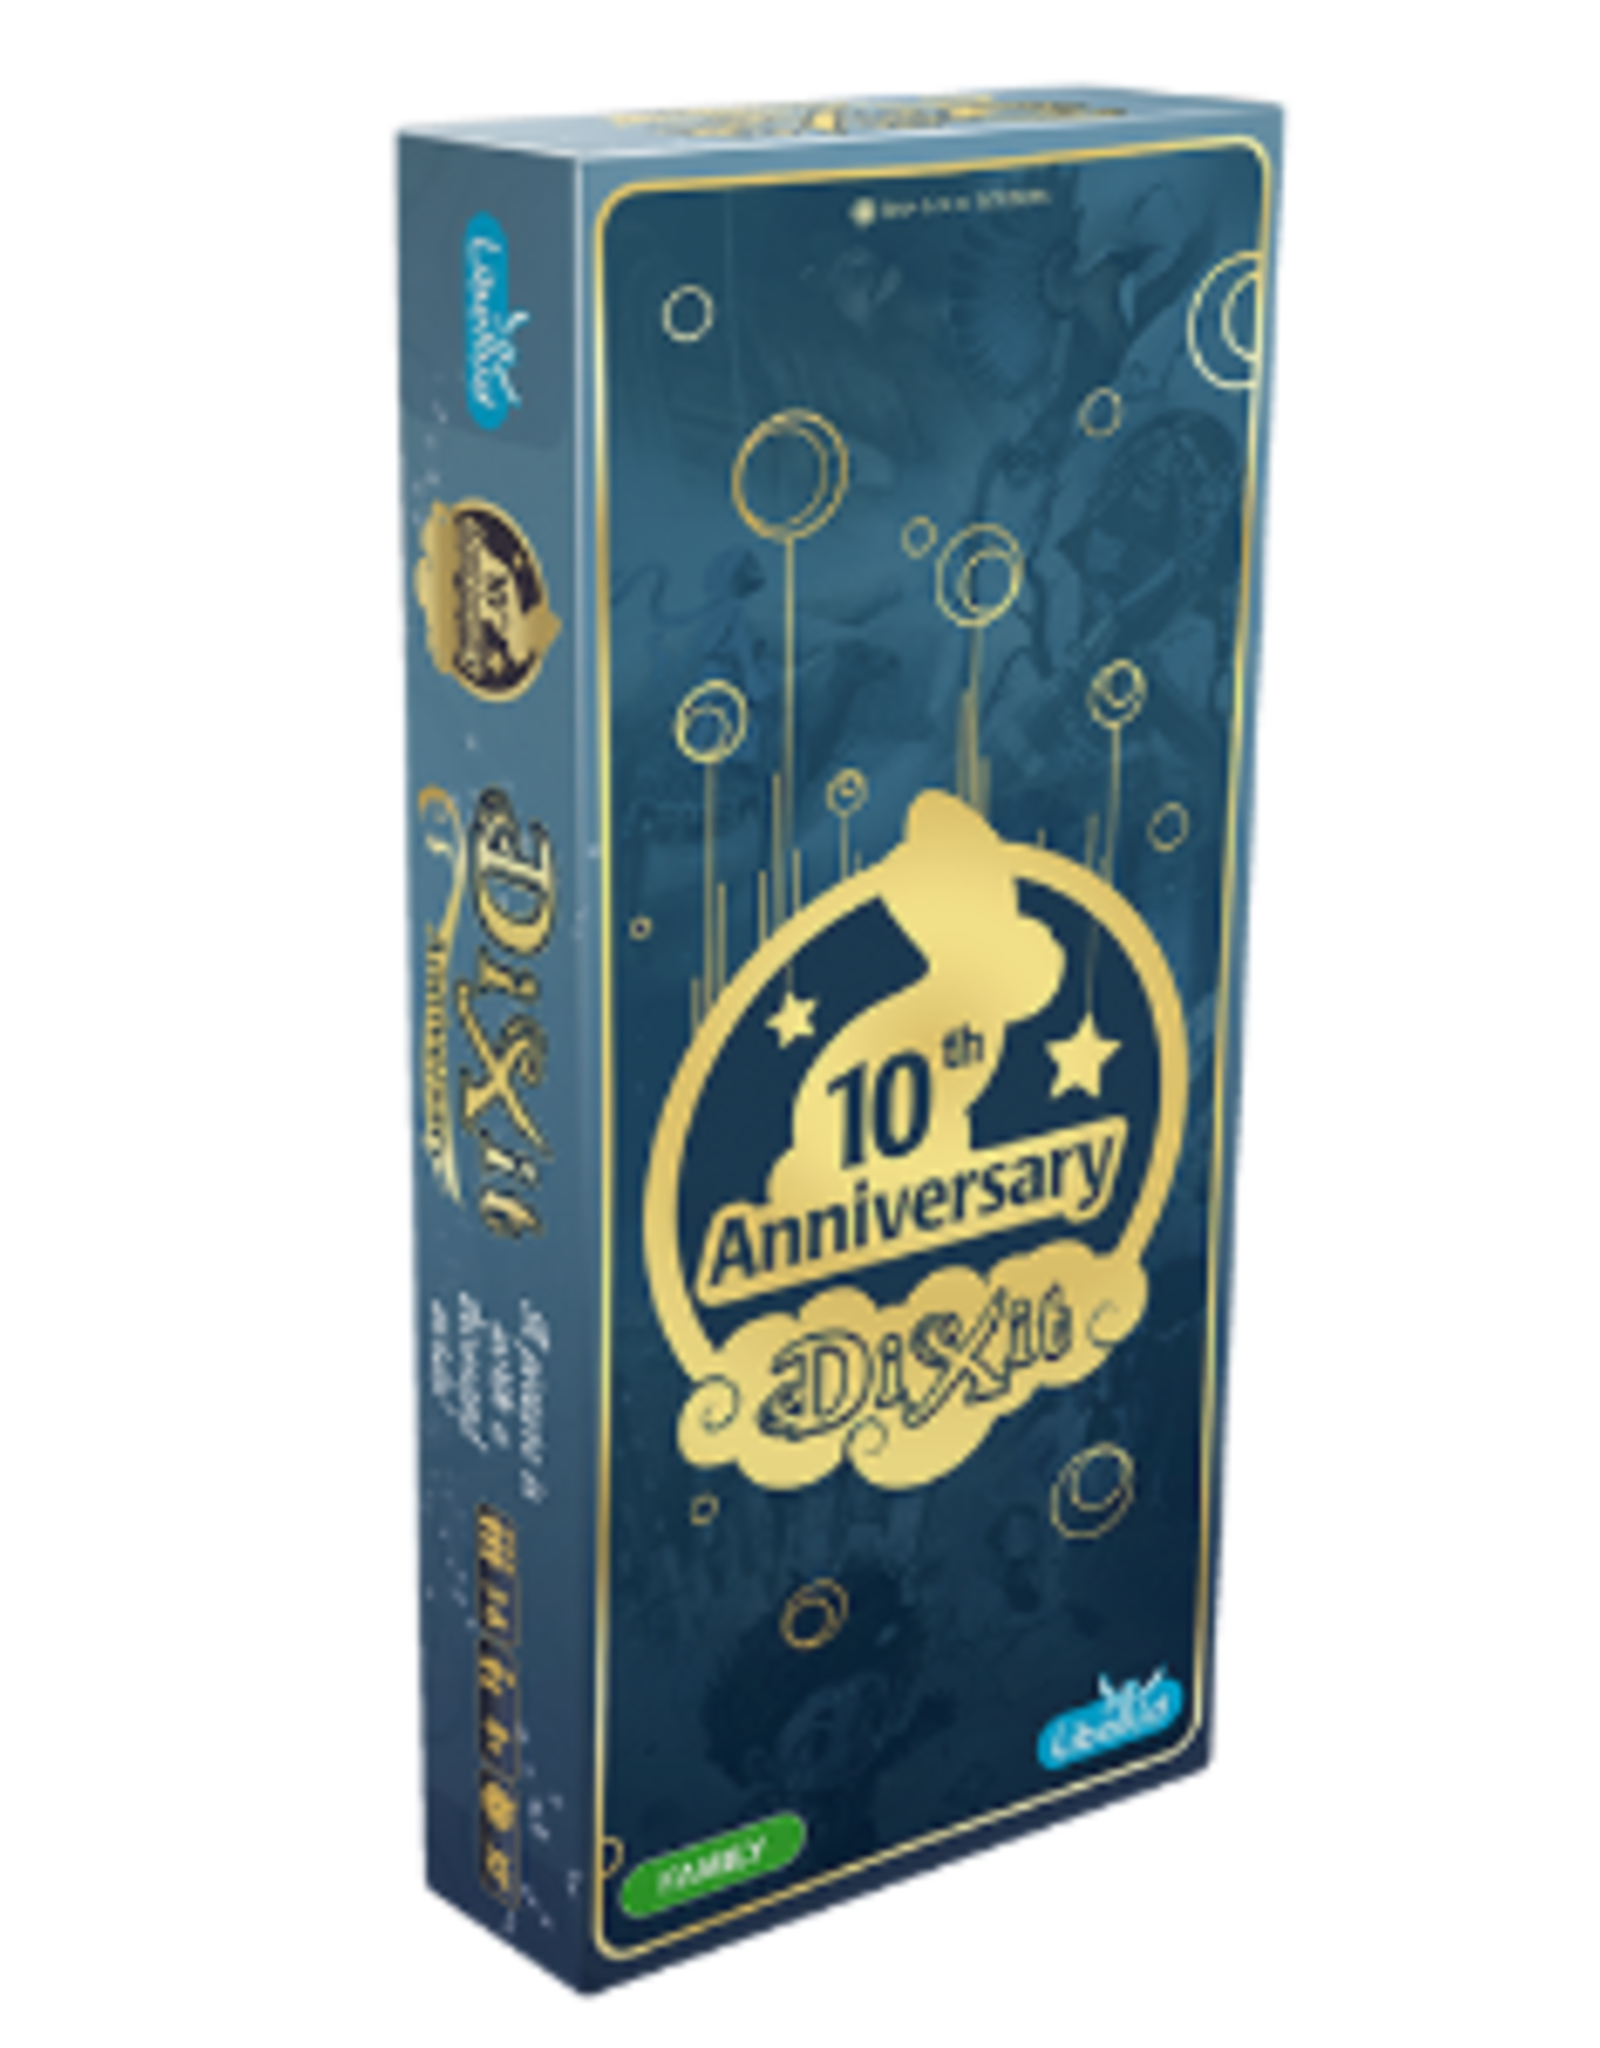 Asmodee Dixit: Anniversary expansion